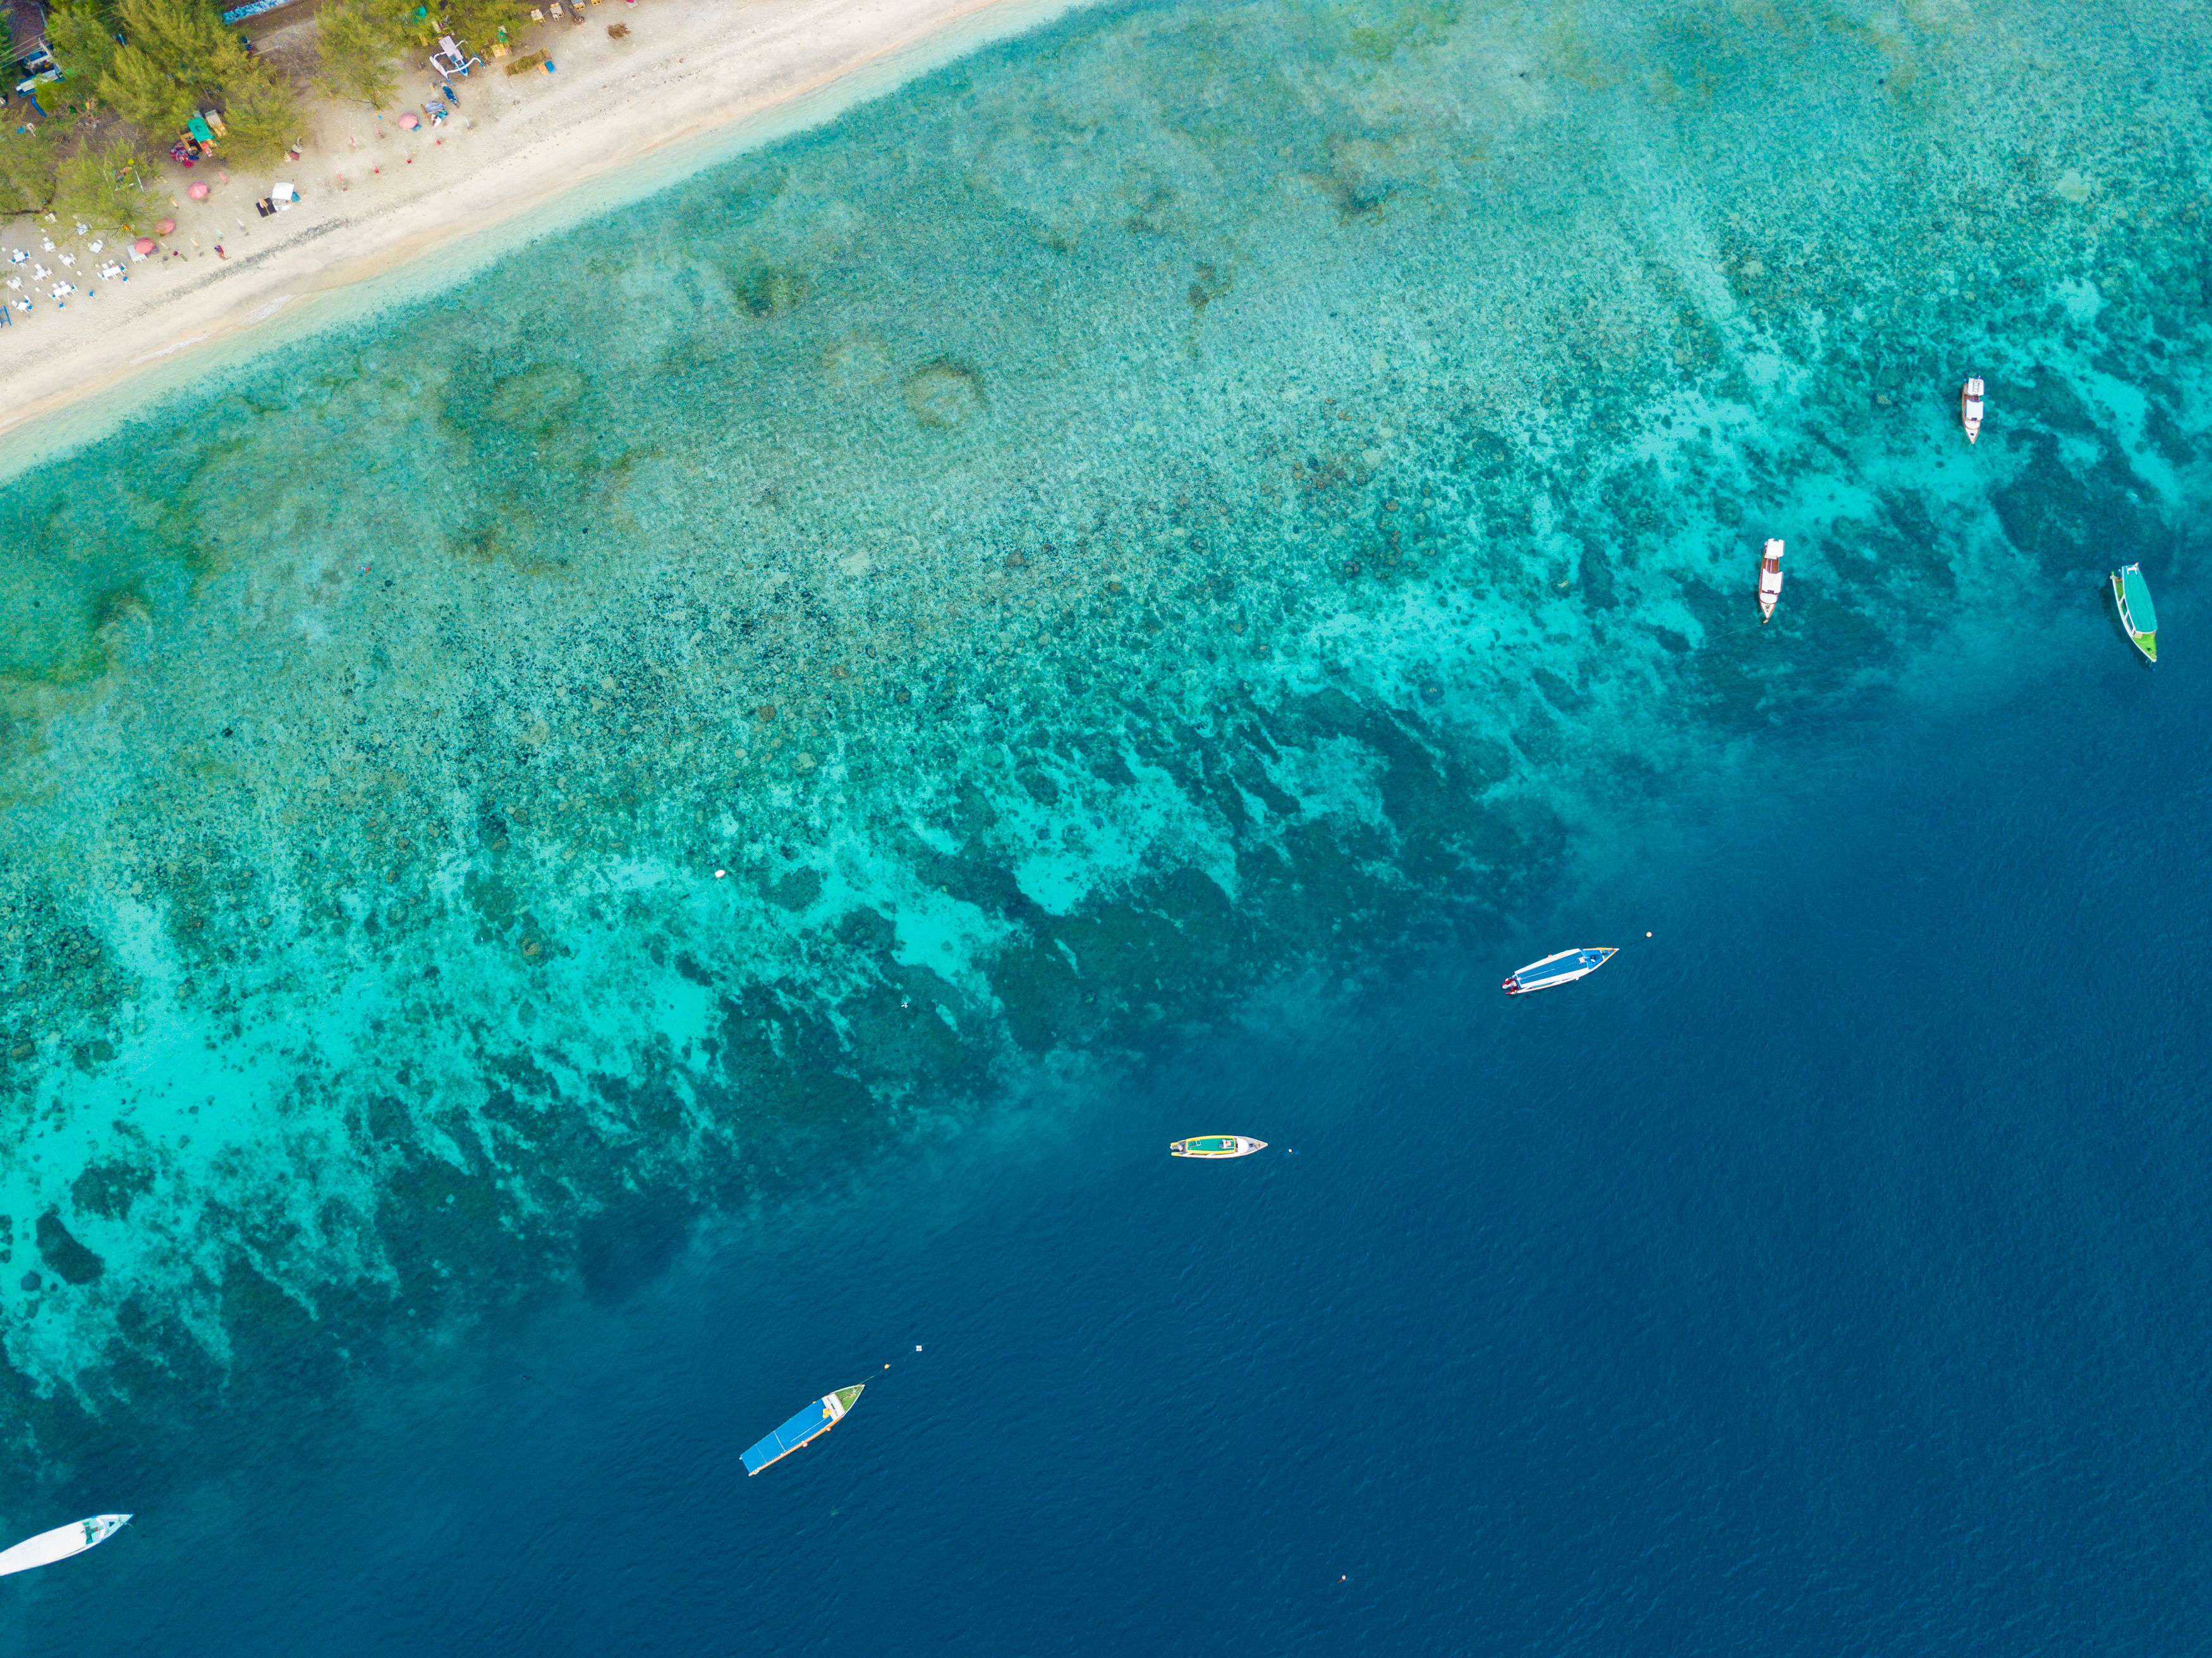 Aerial view of Gili Island coastline with boats, white sand and turquoise waters, West Nusa Tenggara, Indonesia.